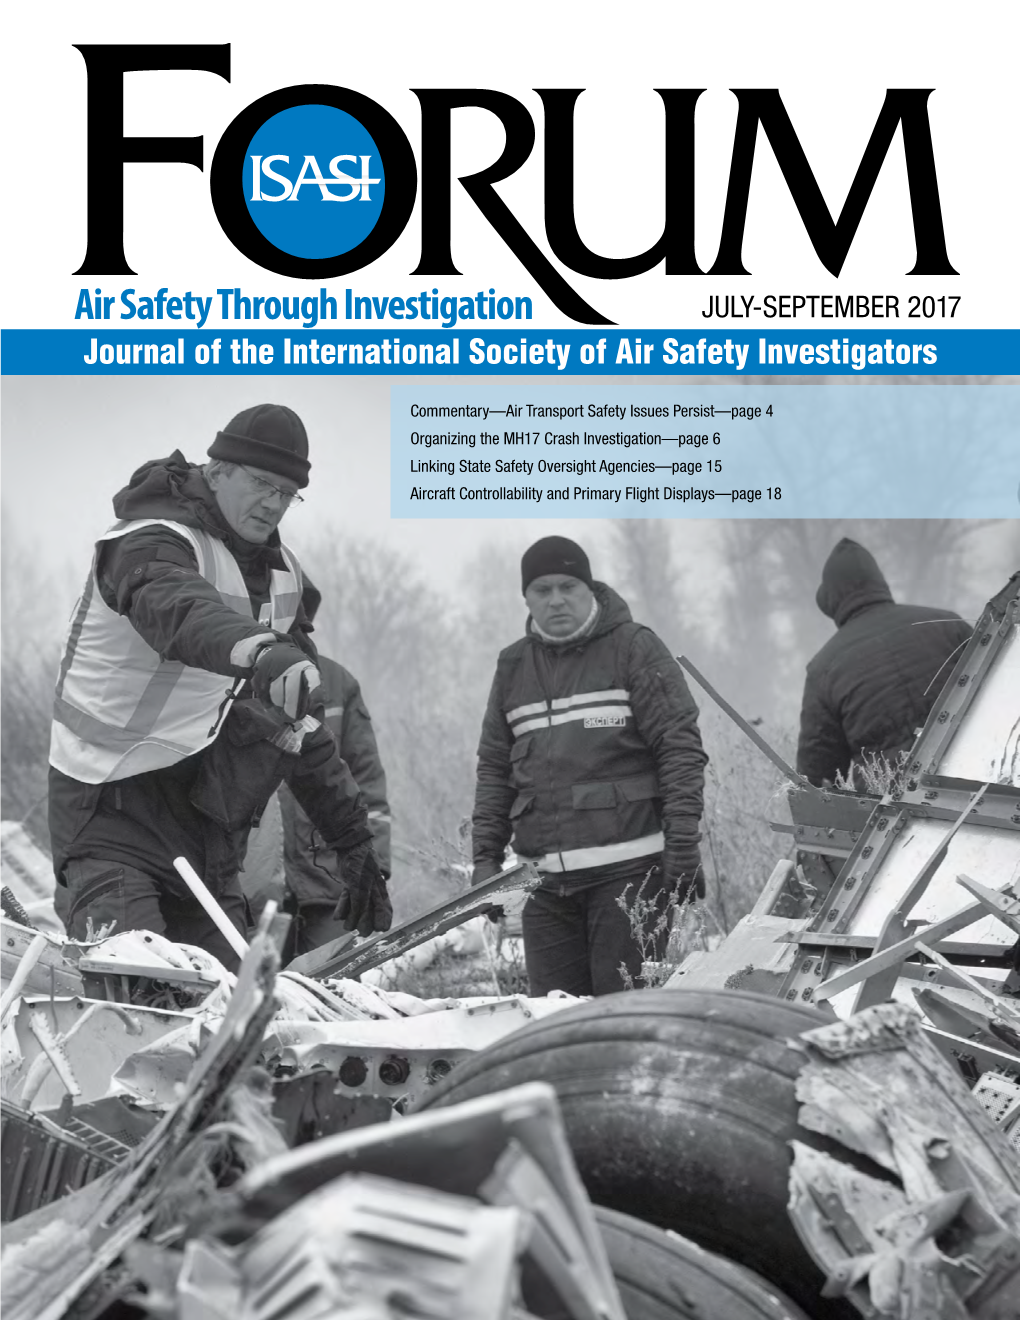 JULY-SEPTEMBER 2017 Journal of the International Society of Air Safety Investigators